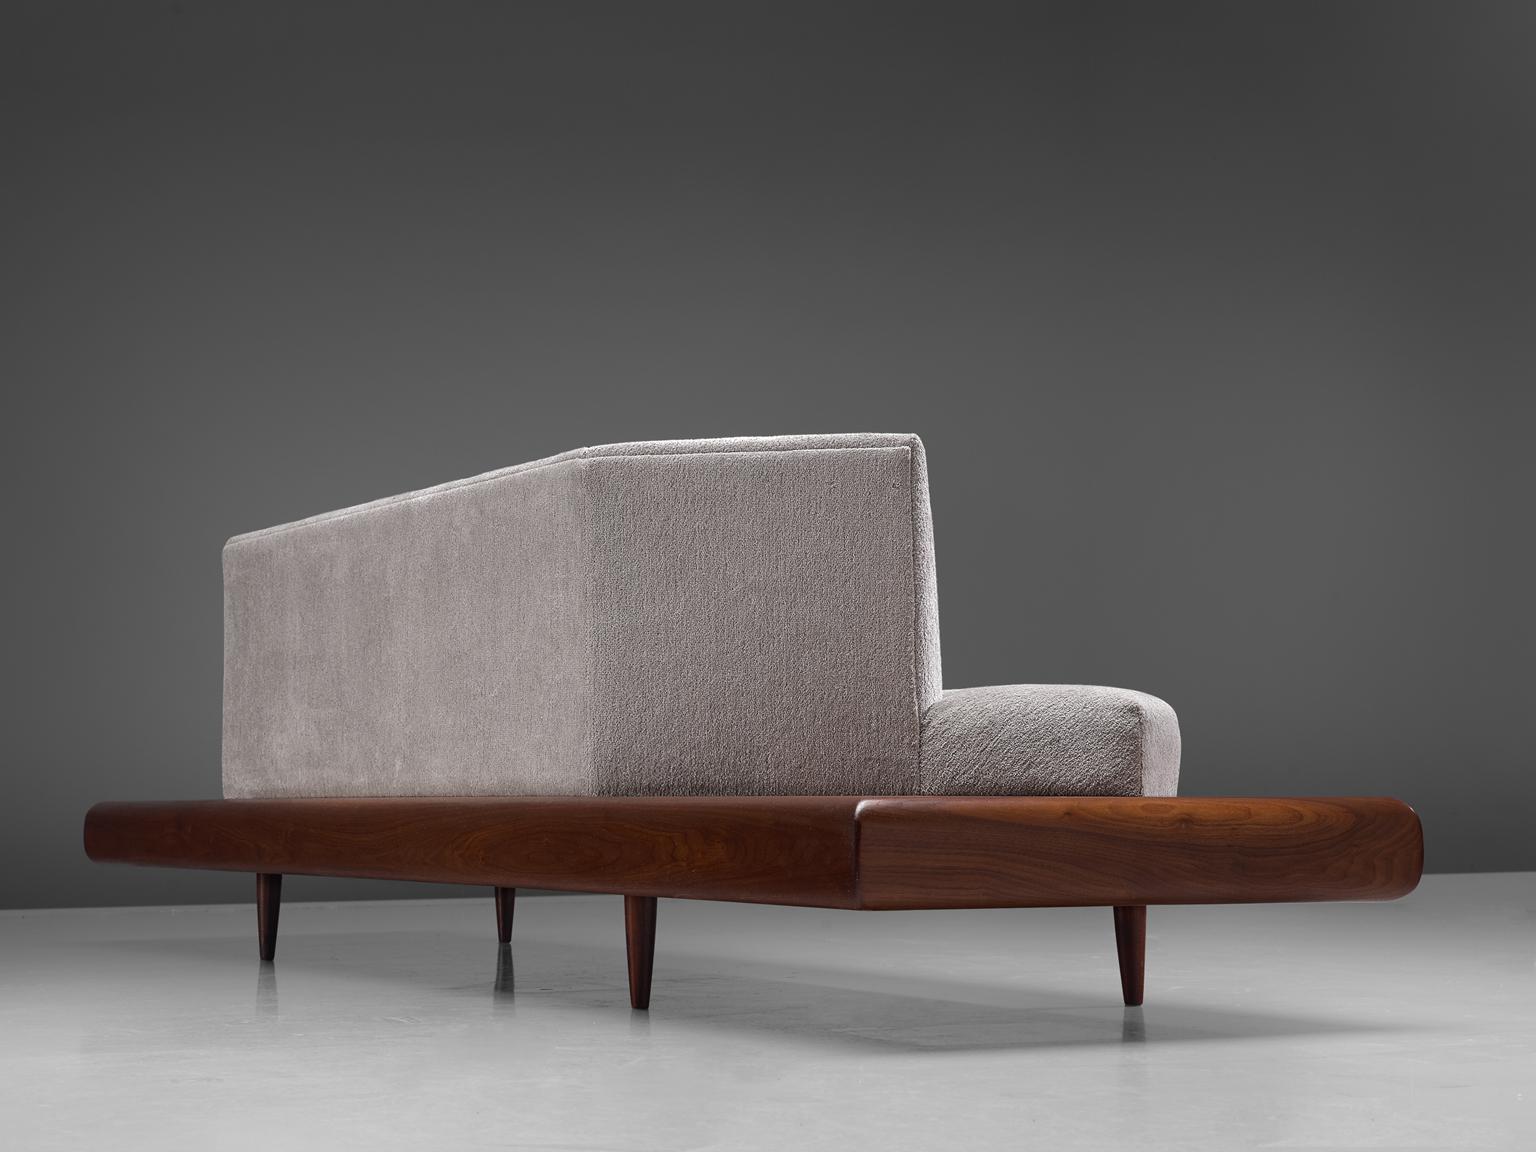 Adrian Pearsall 'Platform' Sofa Reupholstered in Pierre Frey Fabric 1